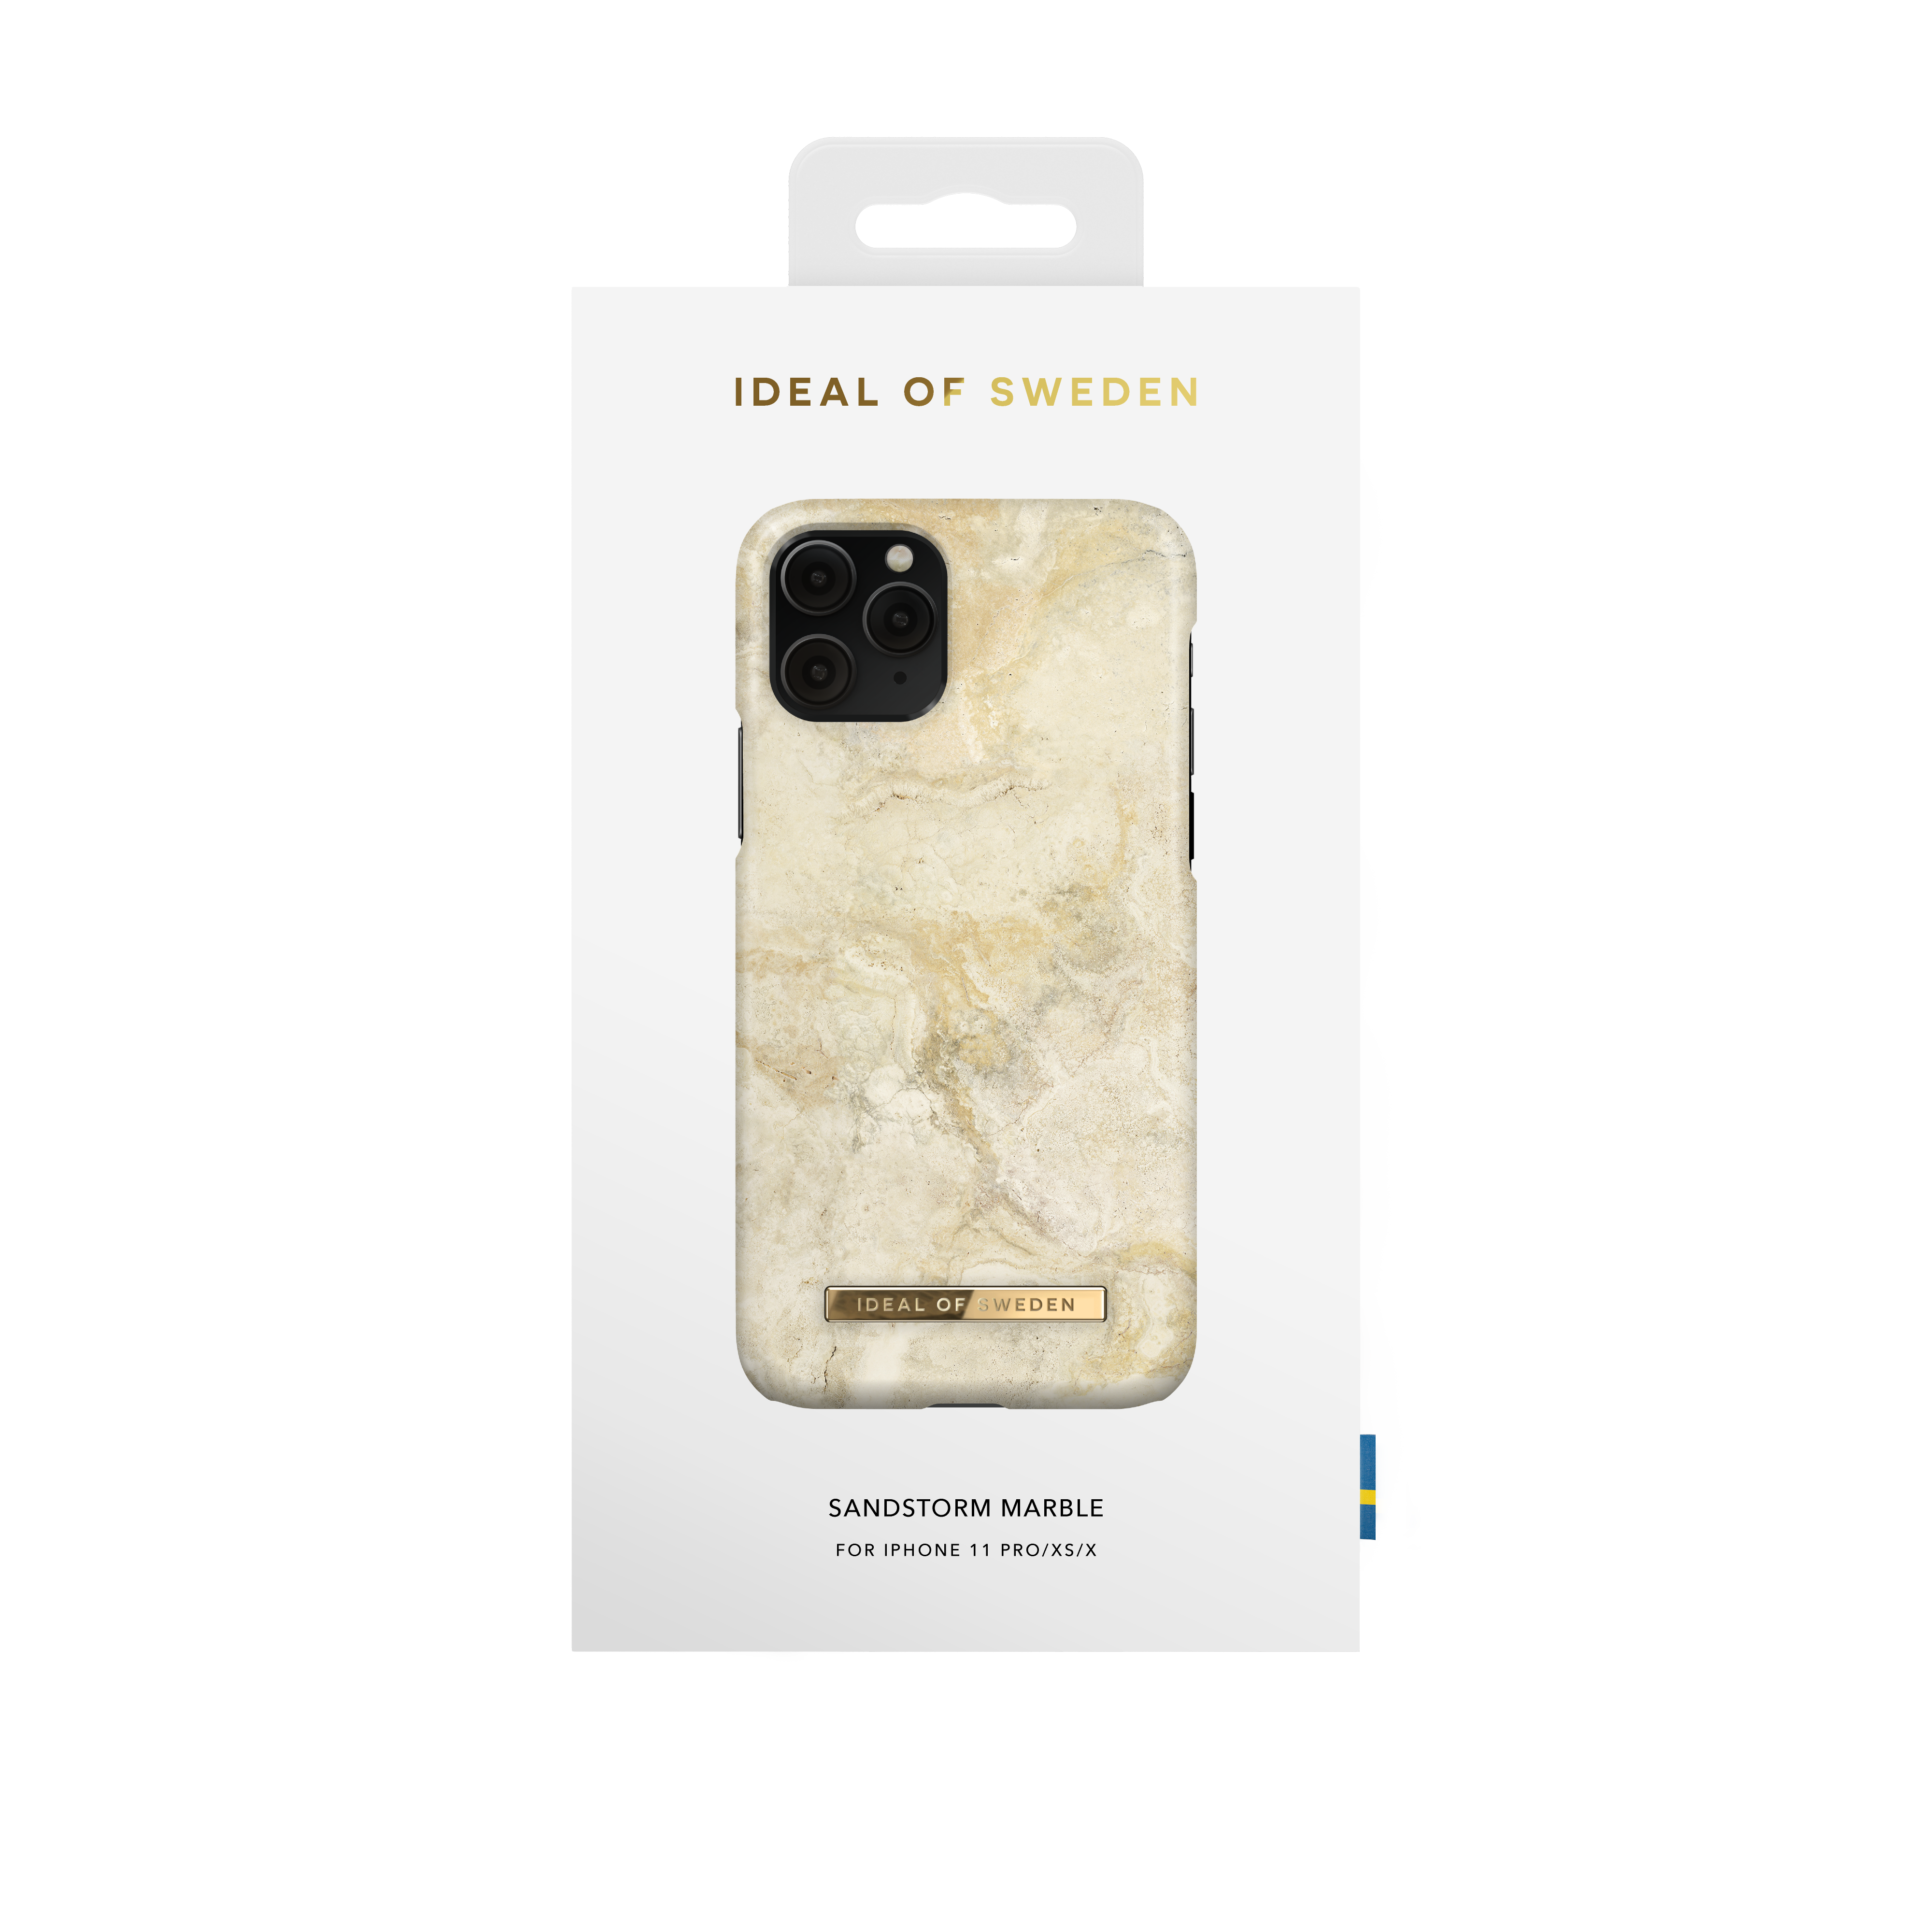 Pro, SWEDEN Backcover, IDEAL OF iPhone iPhone XS, X, Marble iPhone 11 IDFCSS20-I1958-195, Sandstorm Apple,